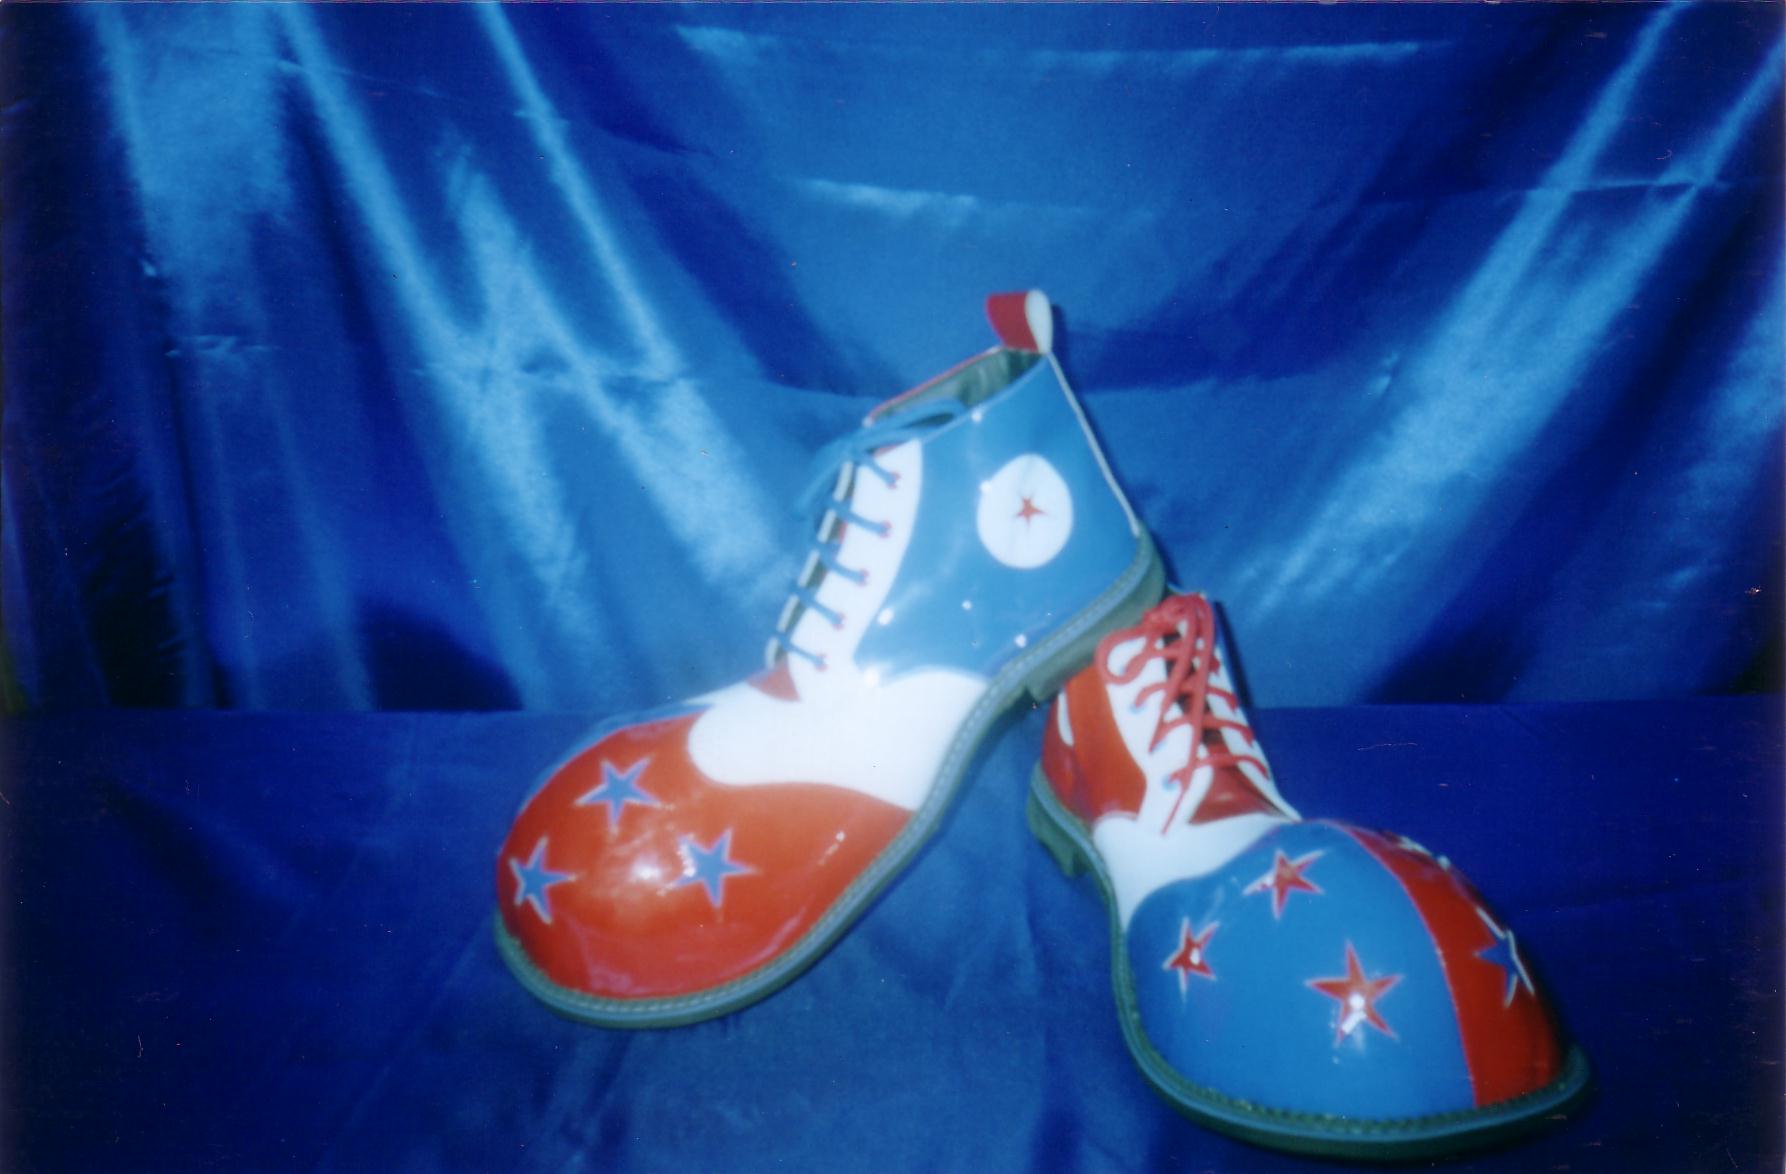 Clown shoes for circus and parades